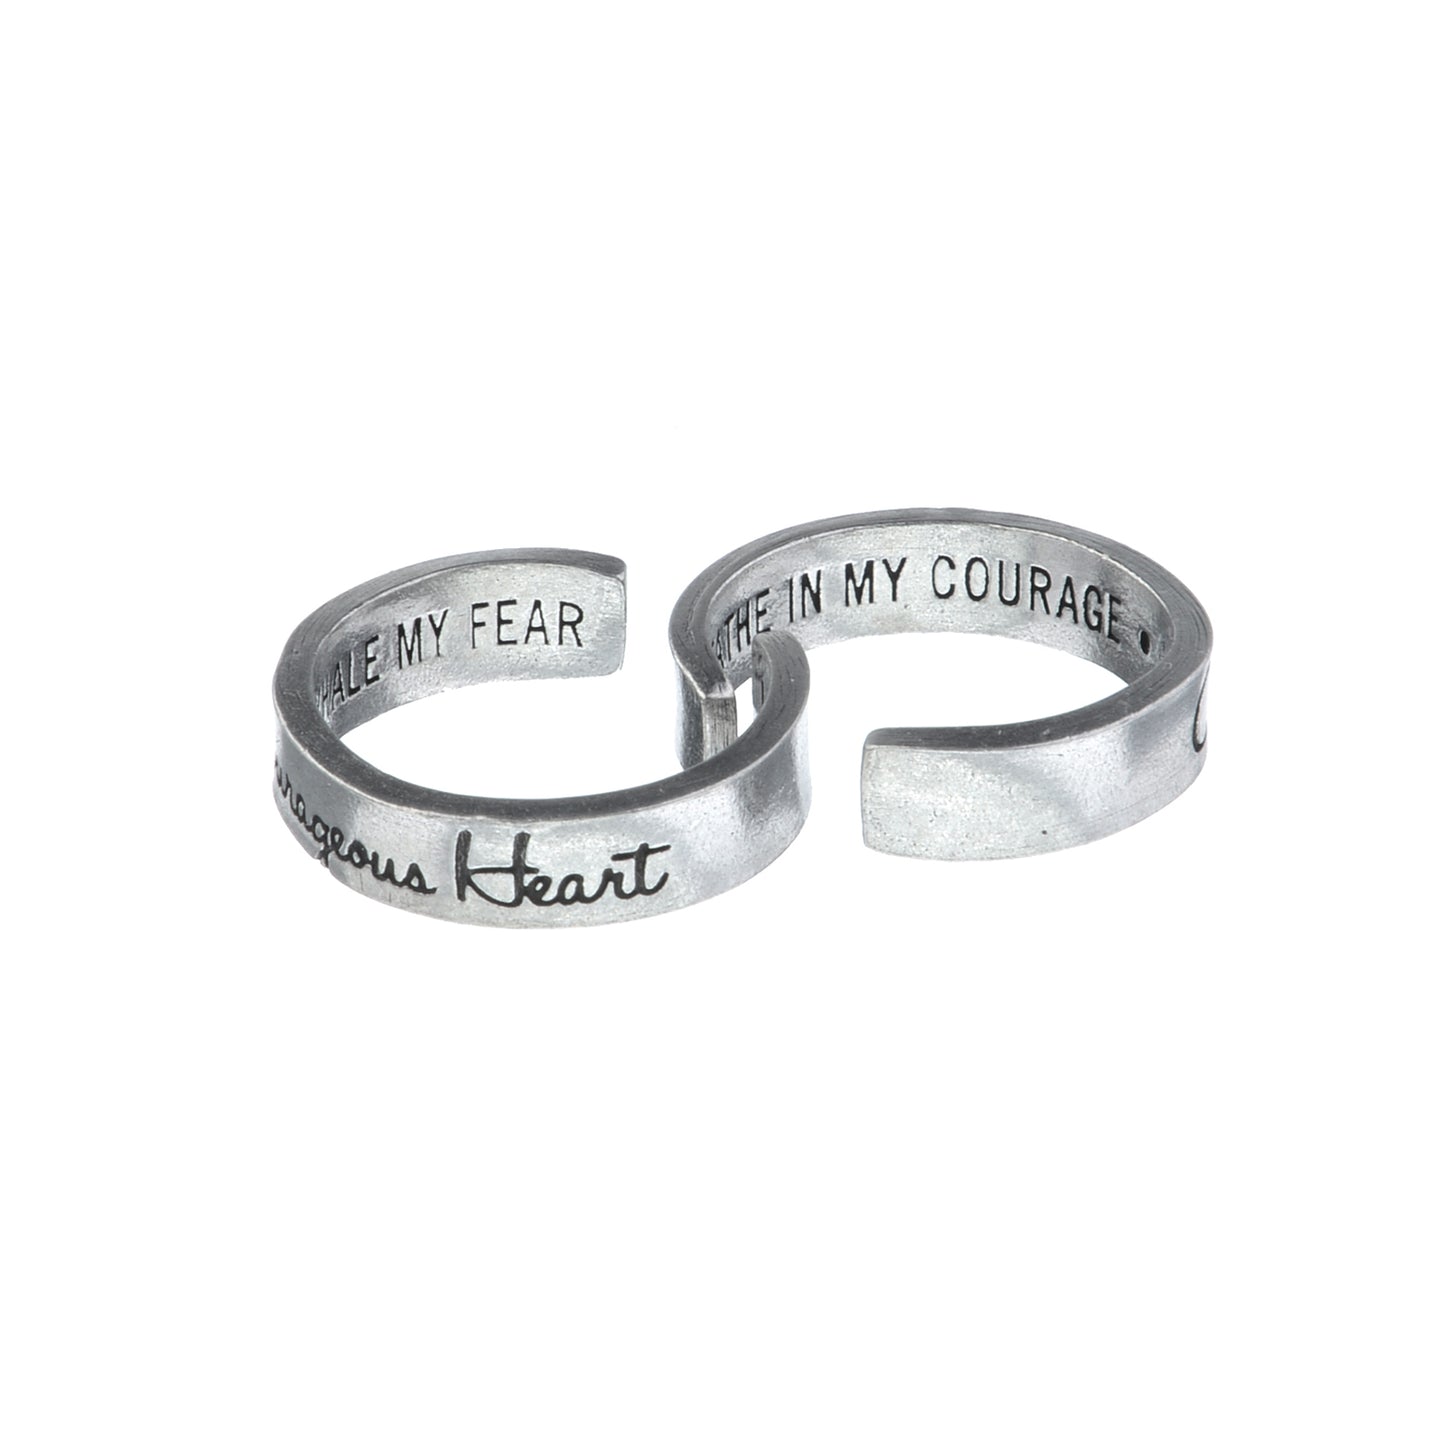 Courageous Heart Inspire Ring